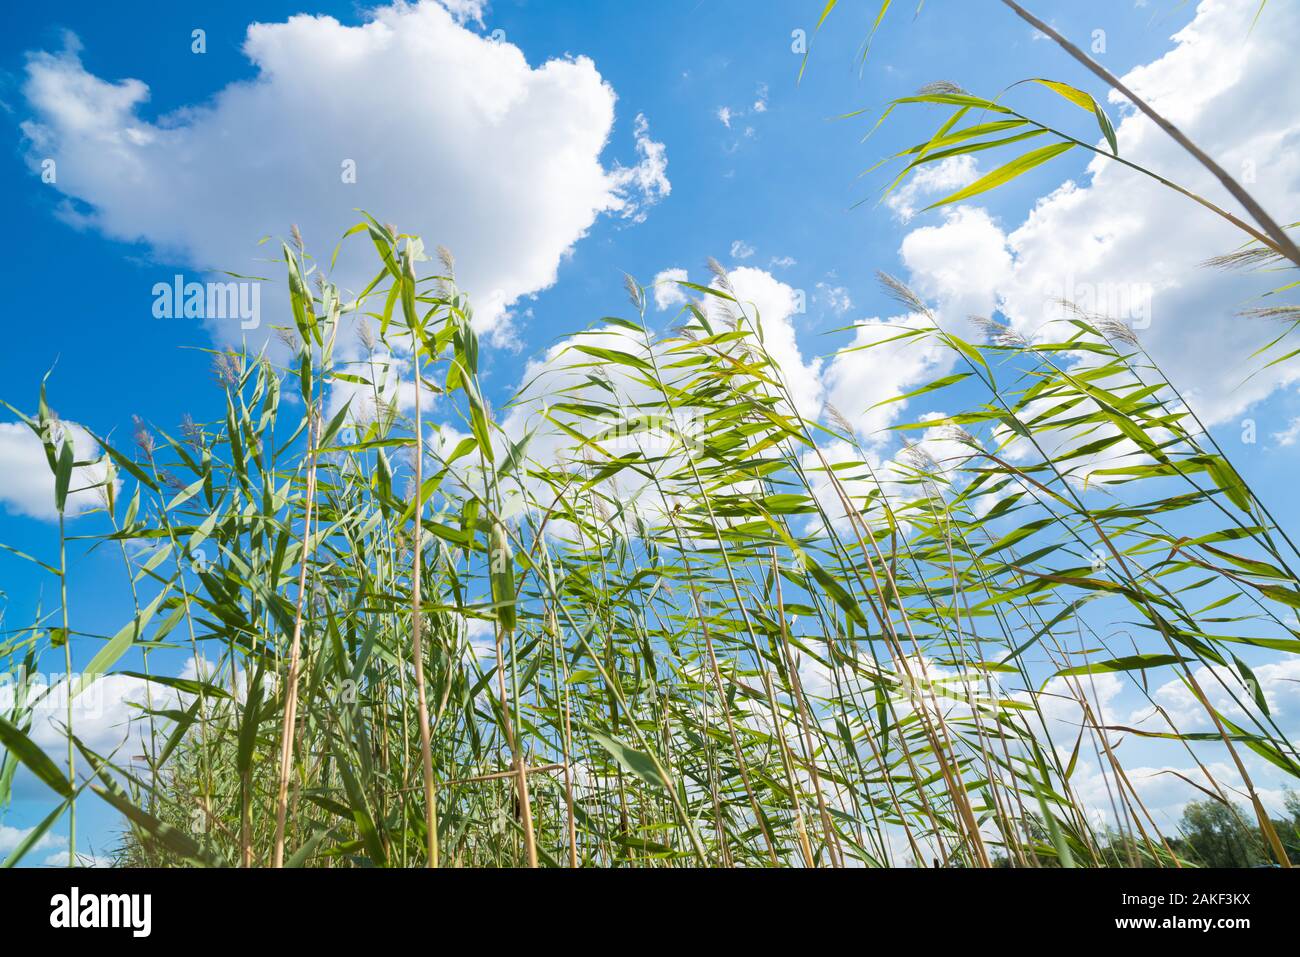 tall reed plants blowing in the wind against a nice cloudy sky Stock Photo